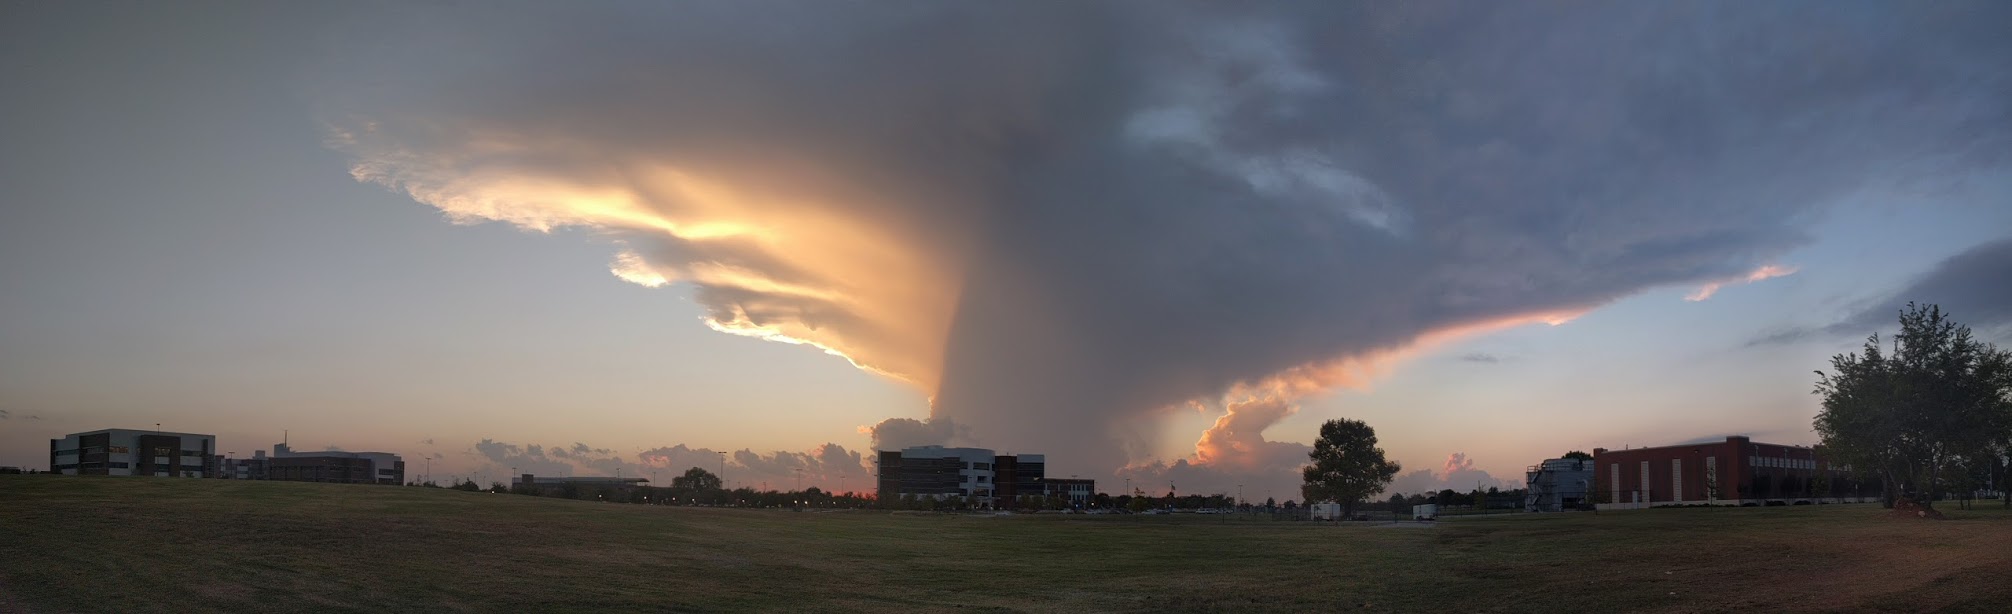 Thunderstorm viewed from east side of OU Research Campus South